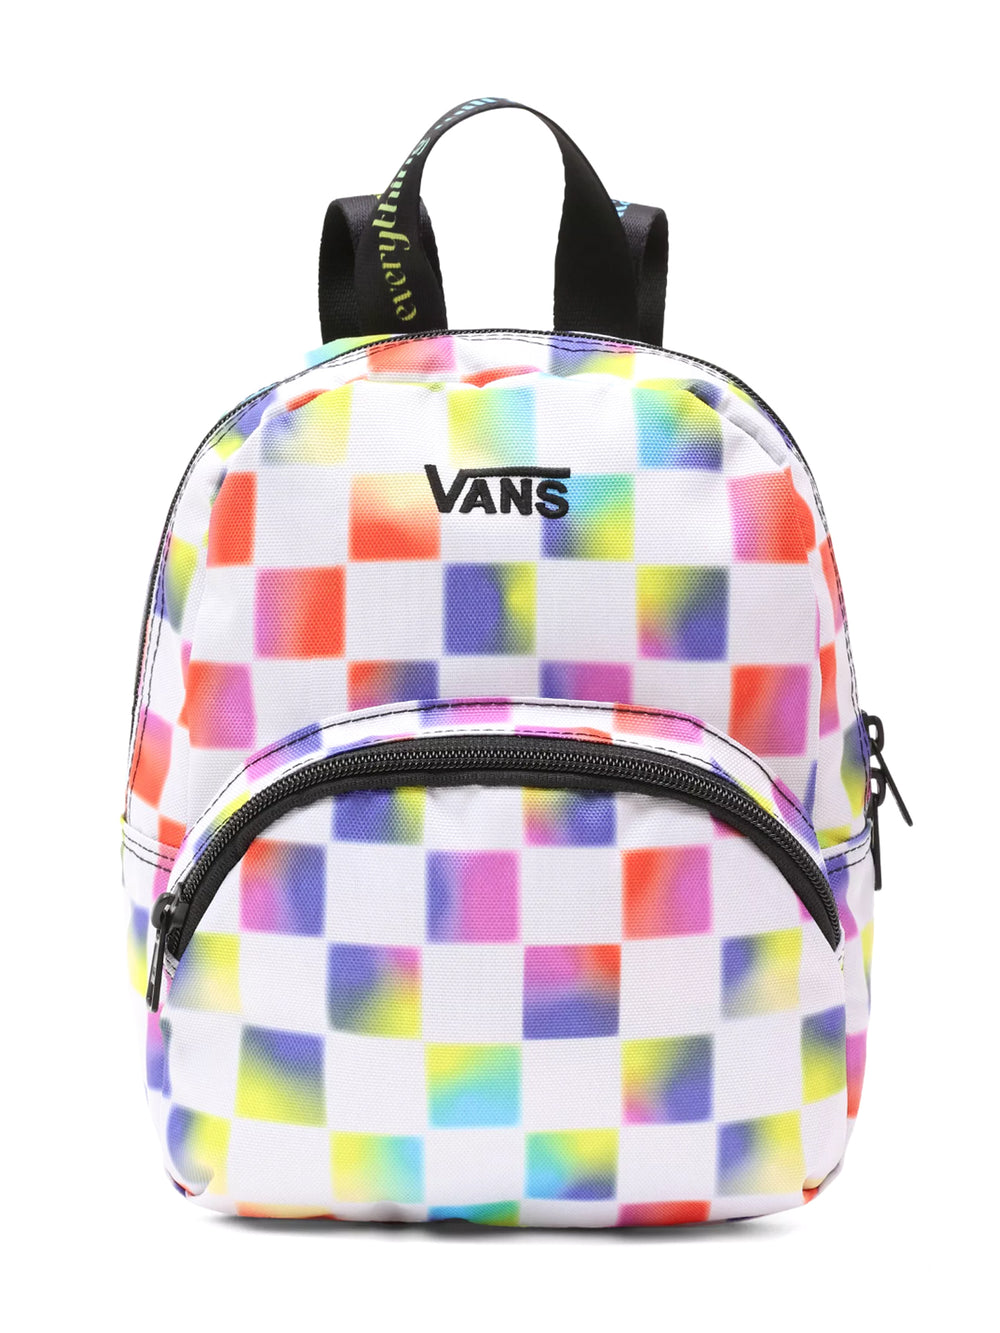 VANS CULTIVATE CARE MINI BACKPACK - CLEARANCE